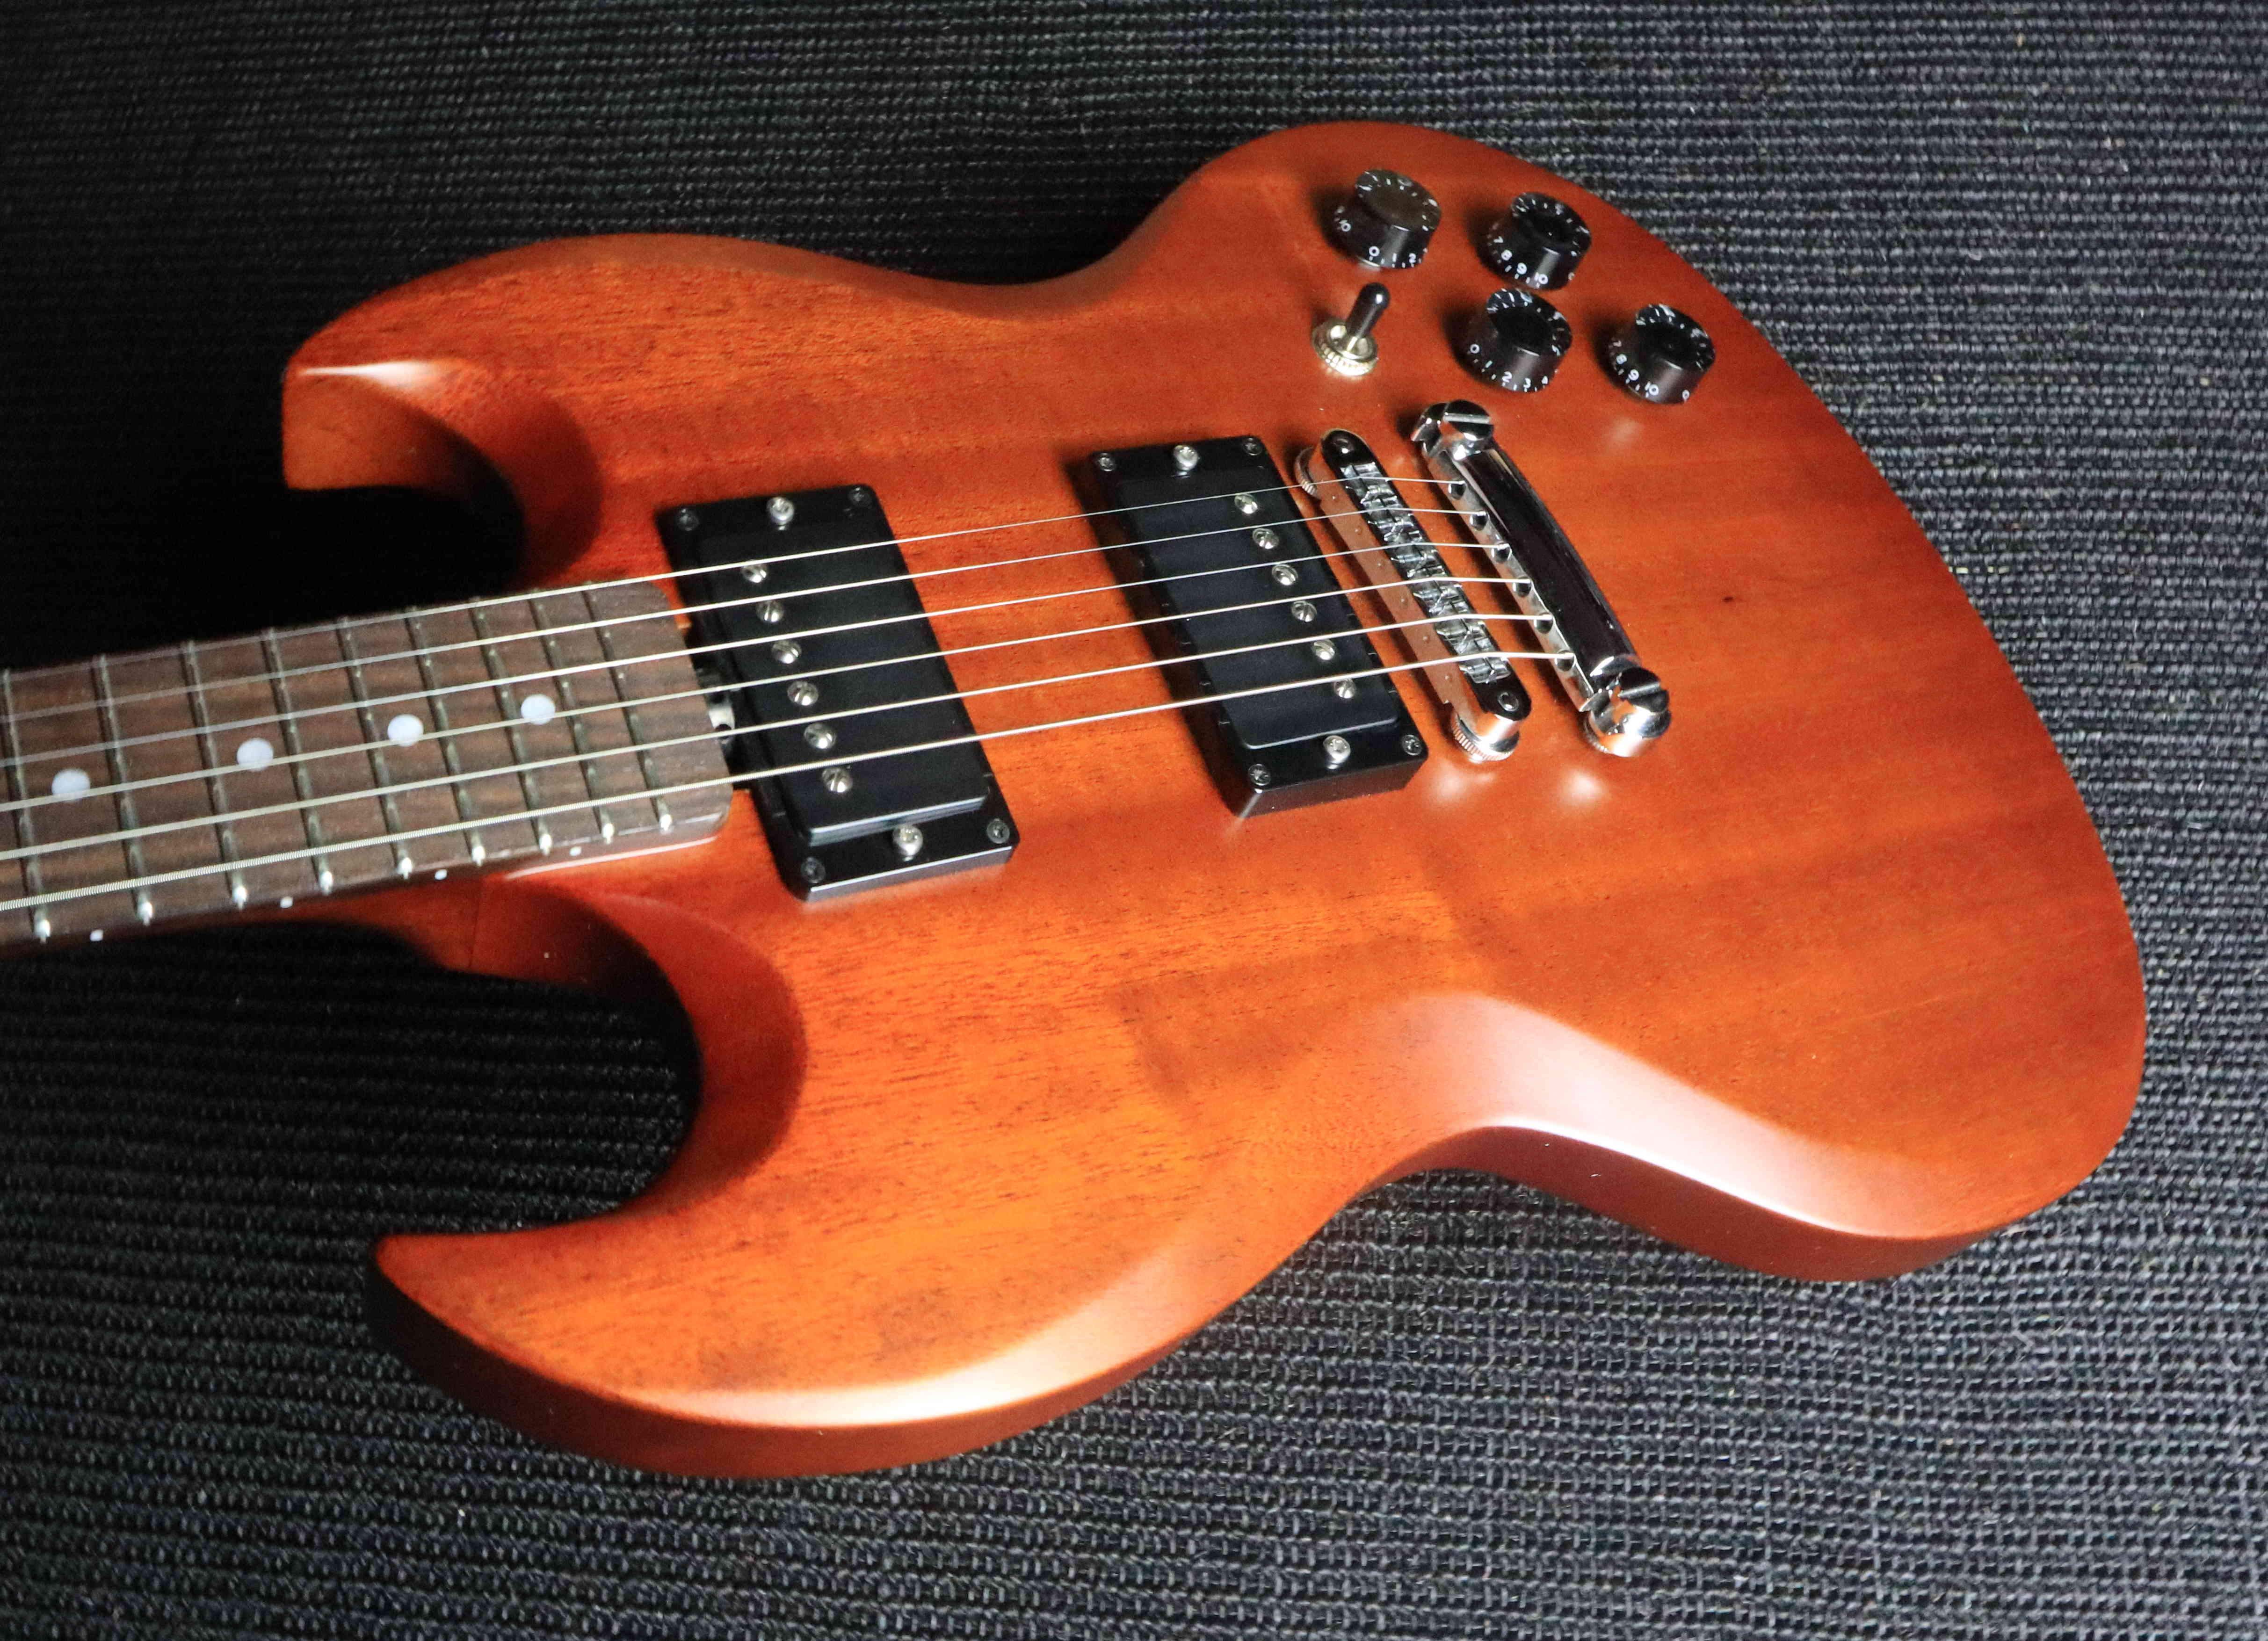 Gordon Smith SG2, Electric Guitar for sale at Richards Guitars.